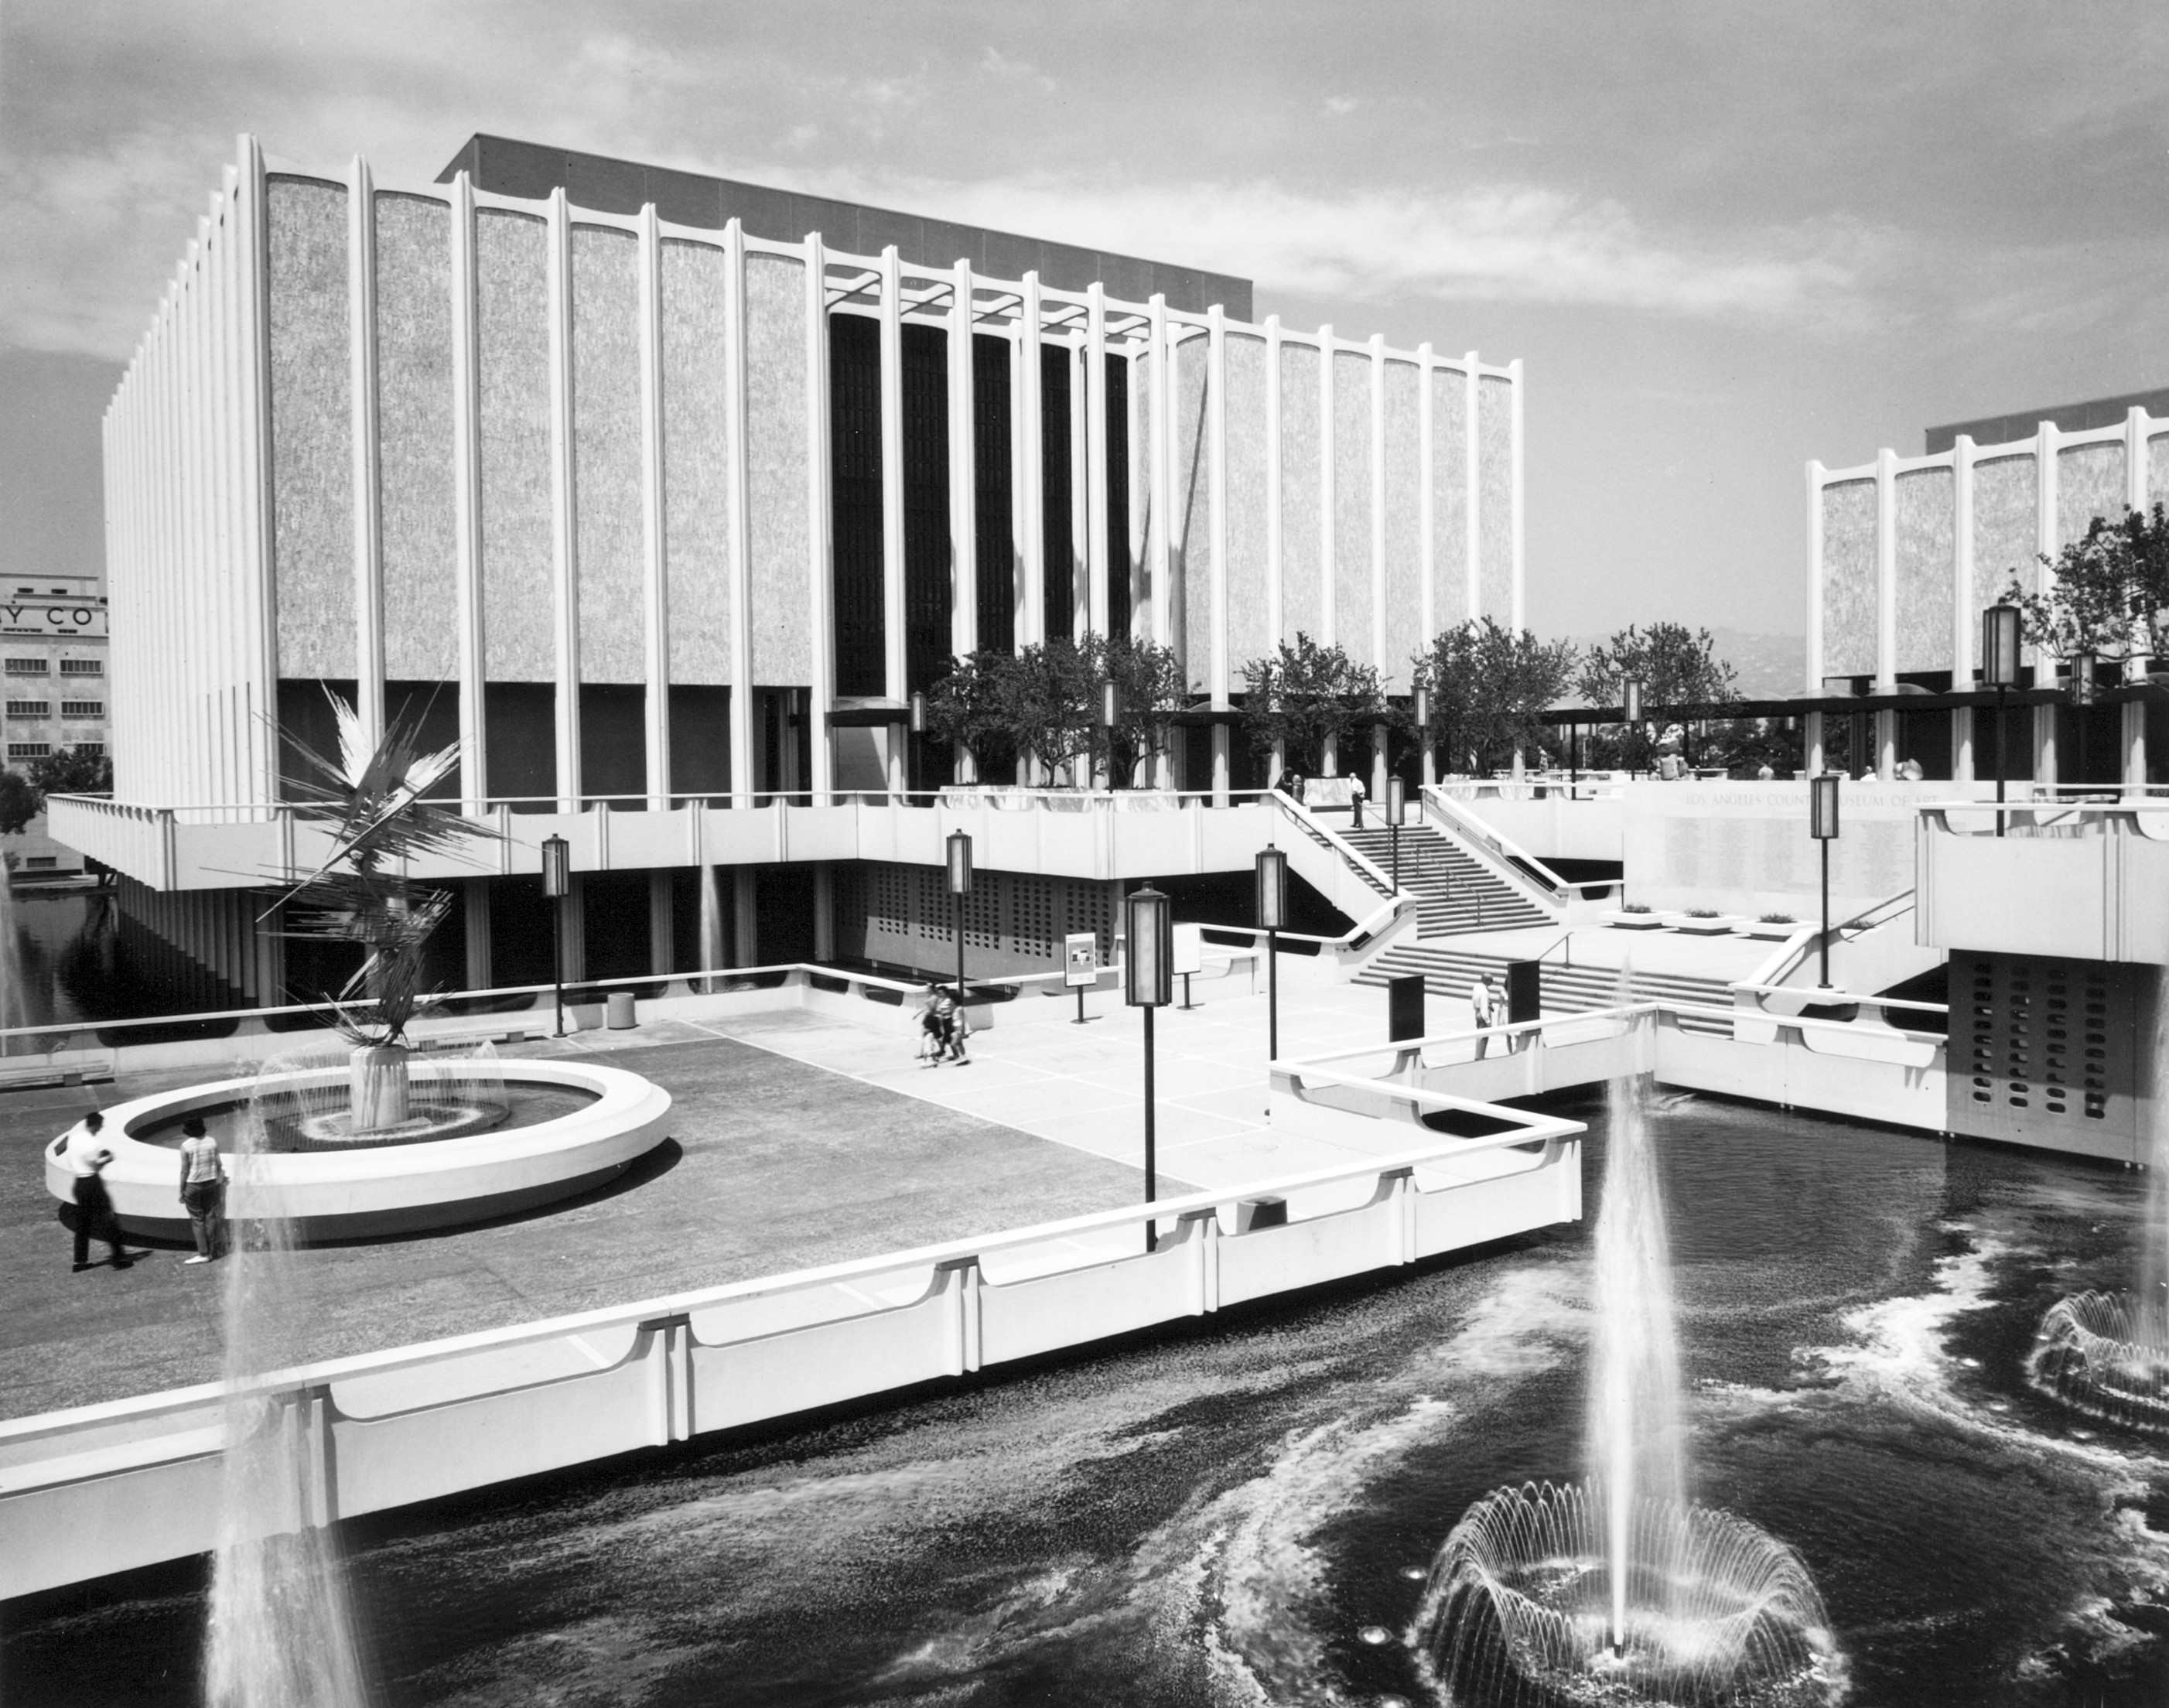 A black and white image of a museum complex with buildings that appear to float over pools of water.